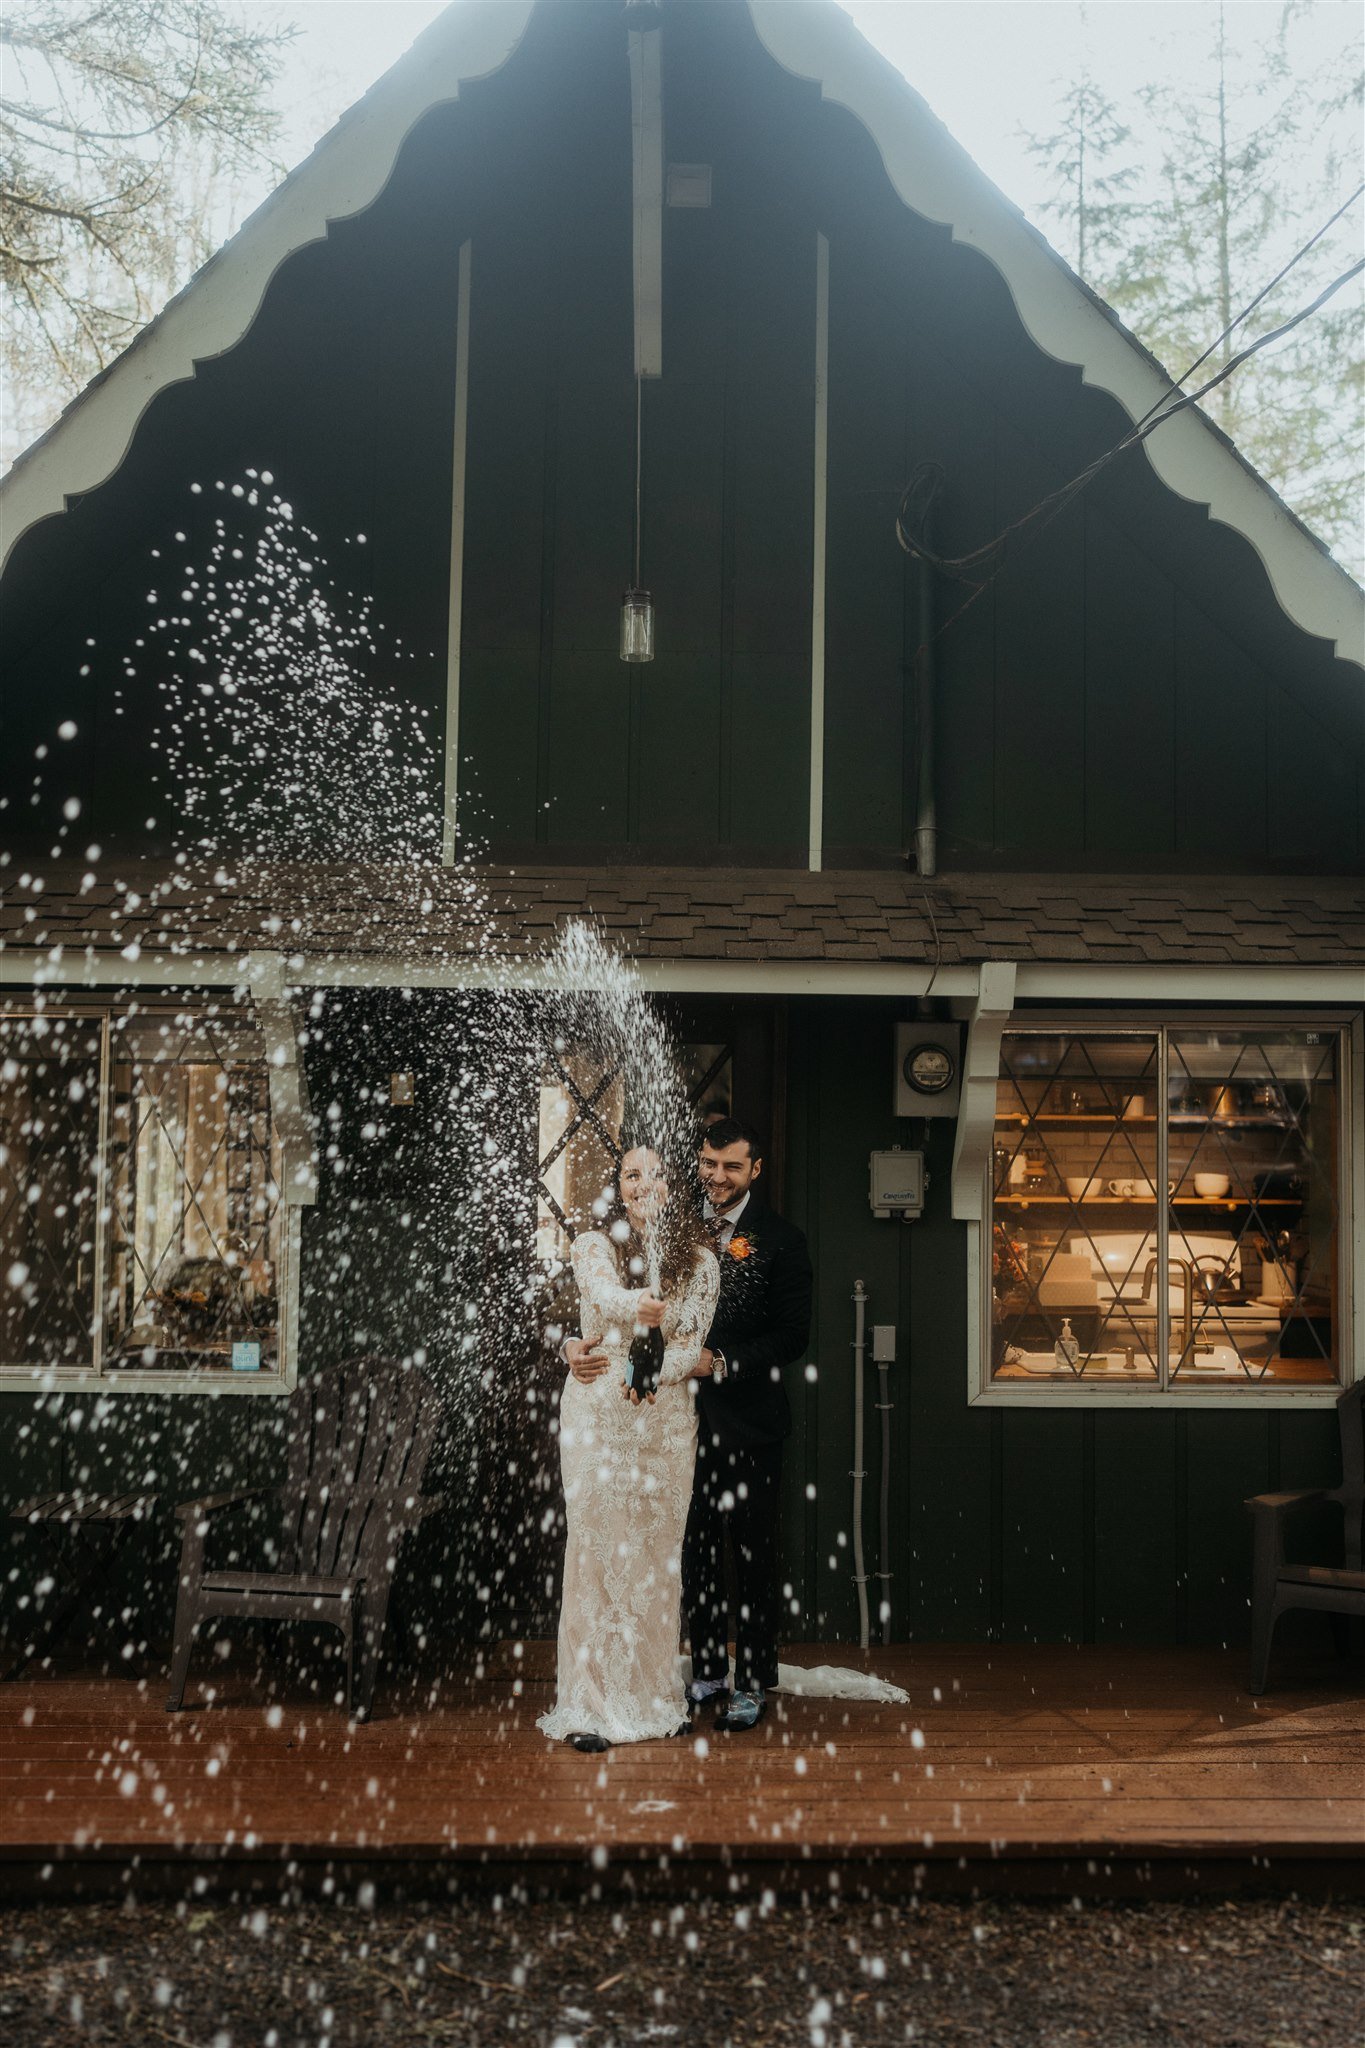 Bride and groom spray champagne in front of mountain cabin in Mt Rainier